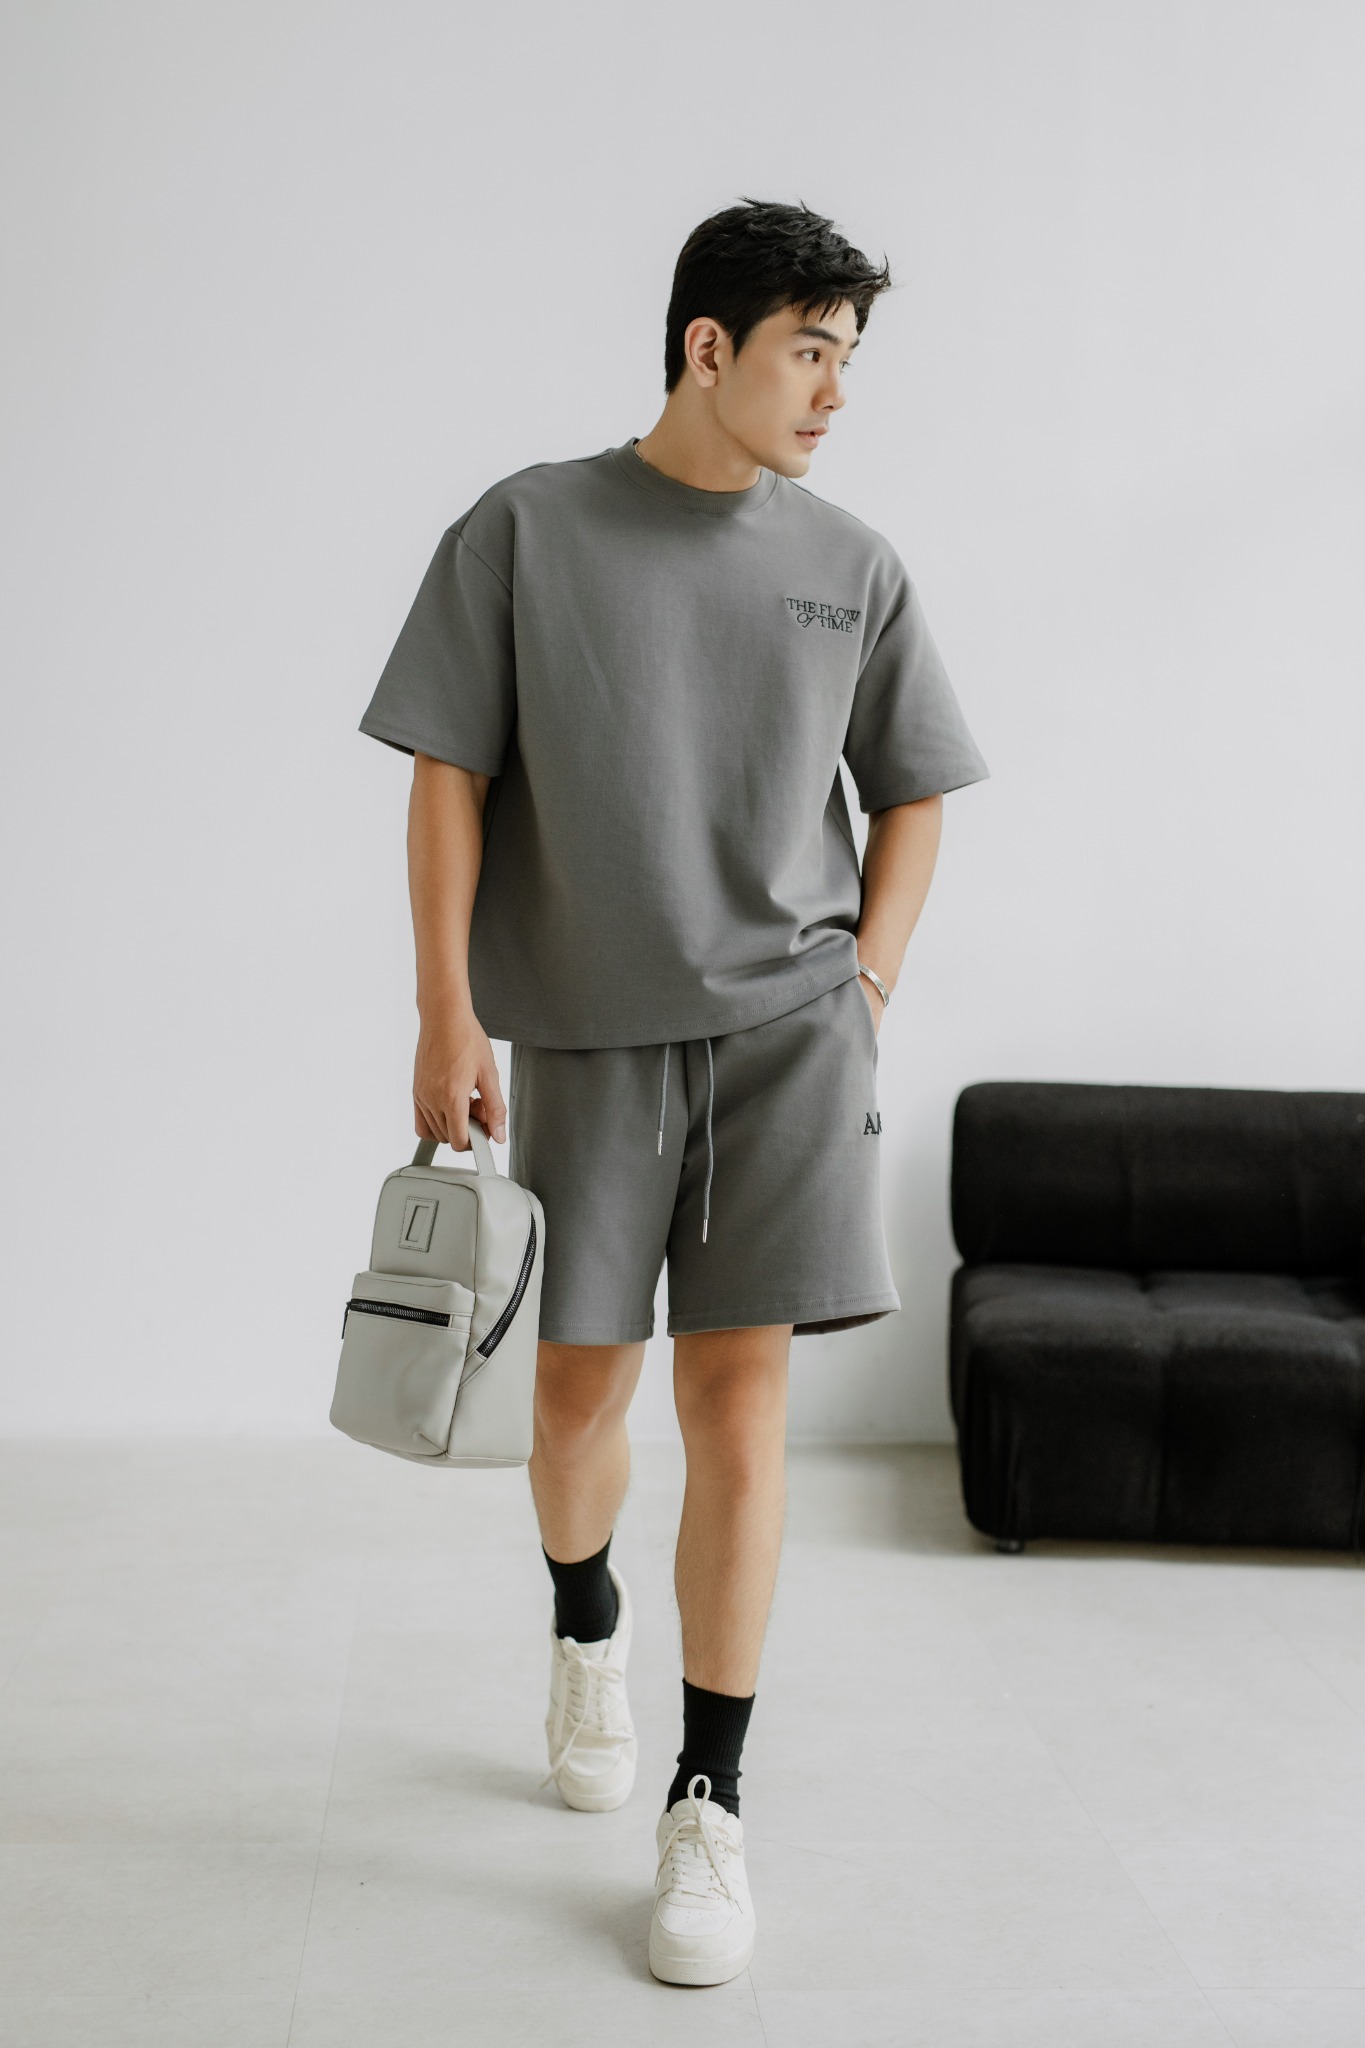 AG710 STUDIO LOOSE FIT "THE FLOW OF TIME" BASIC T-SHIRT - LIGHT GREY